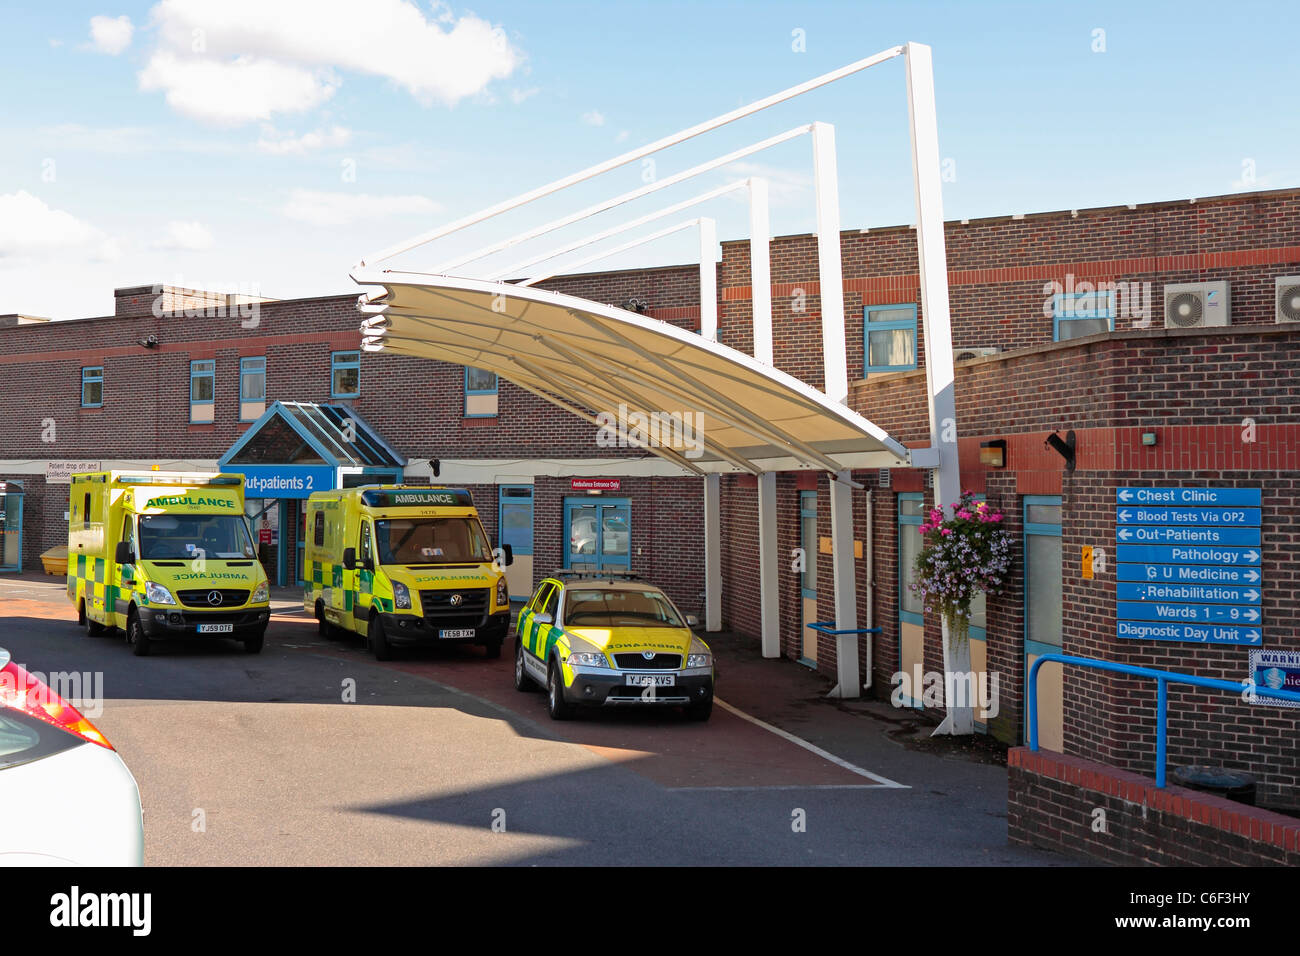 Doncaster Royal Infirmary A&E Accident and Emergency Department and Outpatients 2 entrance with ambulances and a fast responder parked outside Stock Photo